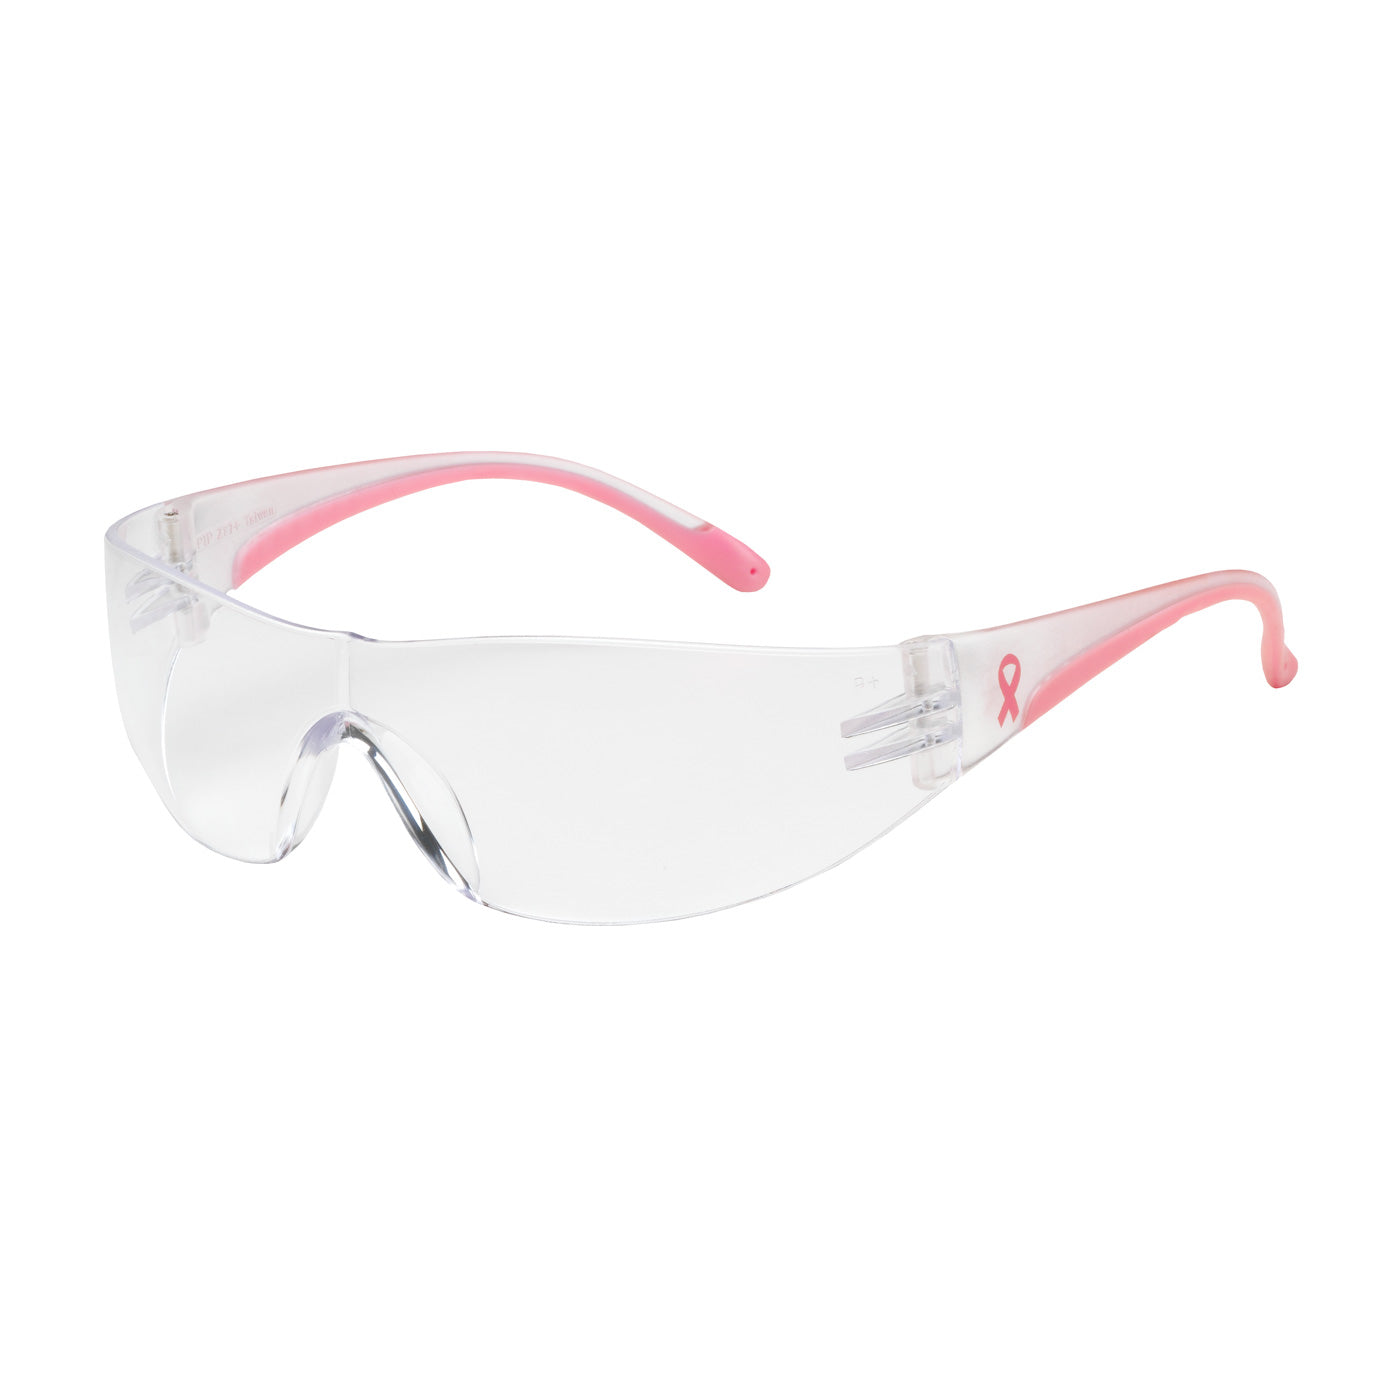 Rimless Safety Glasses with Clear / Pink Temple, Clear Lens and Anti-Scratch Coating-eSafety Supplies, Inc